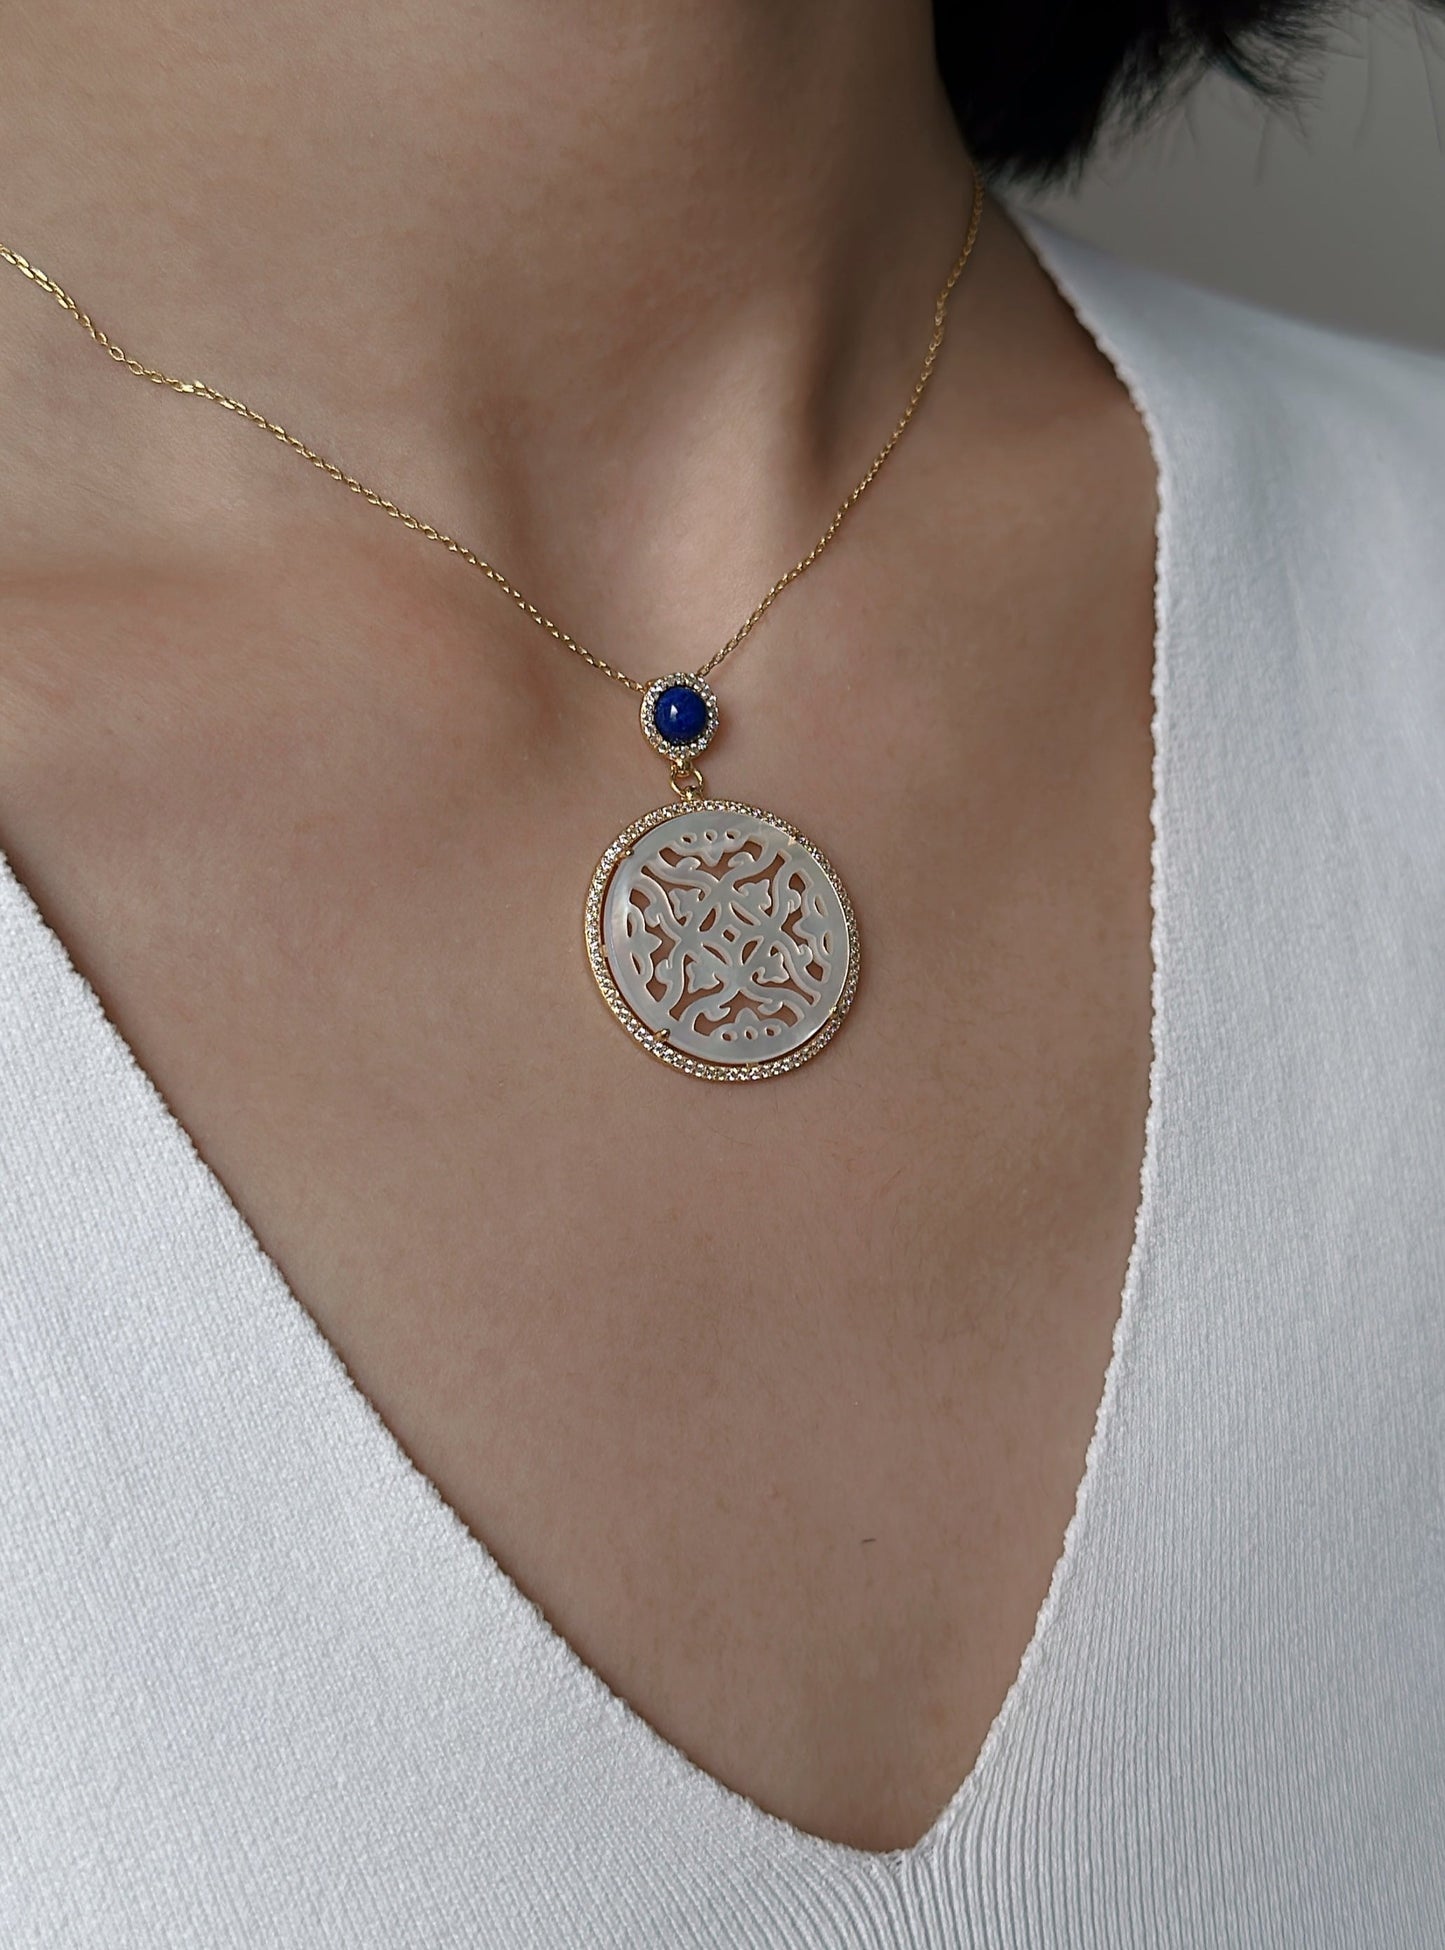 Yellow Gold Plated Sterling Silver Necklace with Mother of Pearl and Blue Lapis Lazuli, NL12